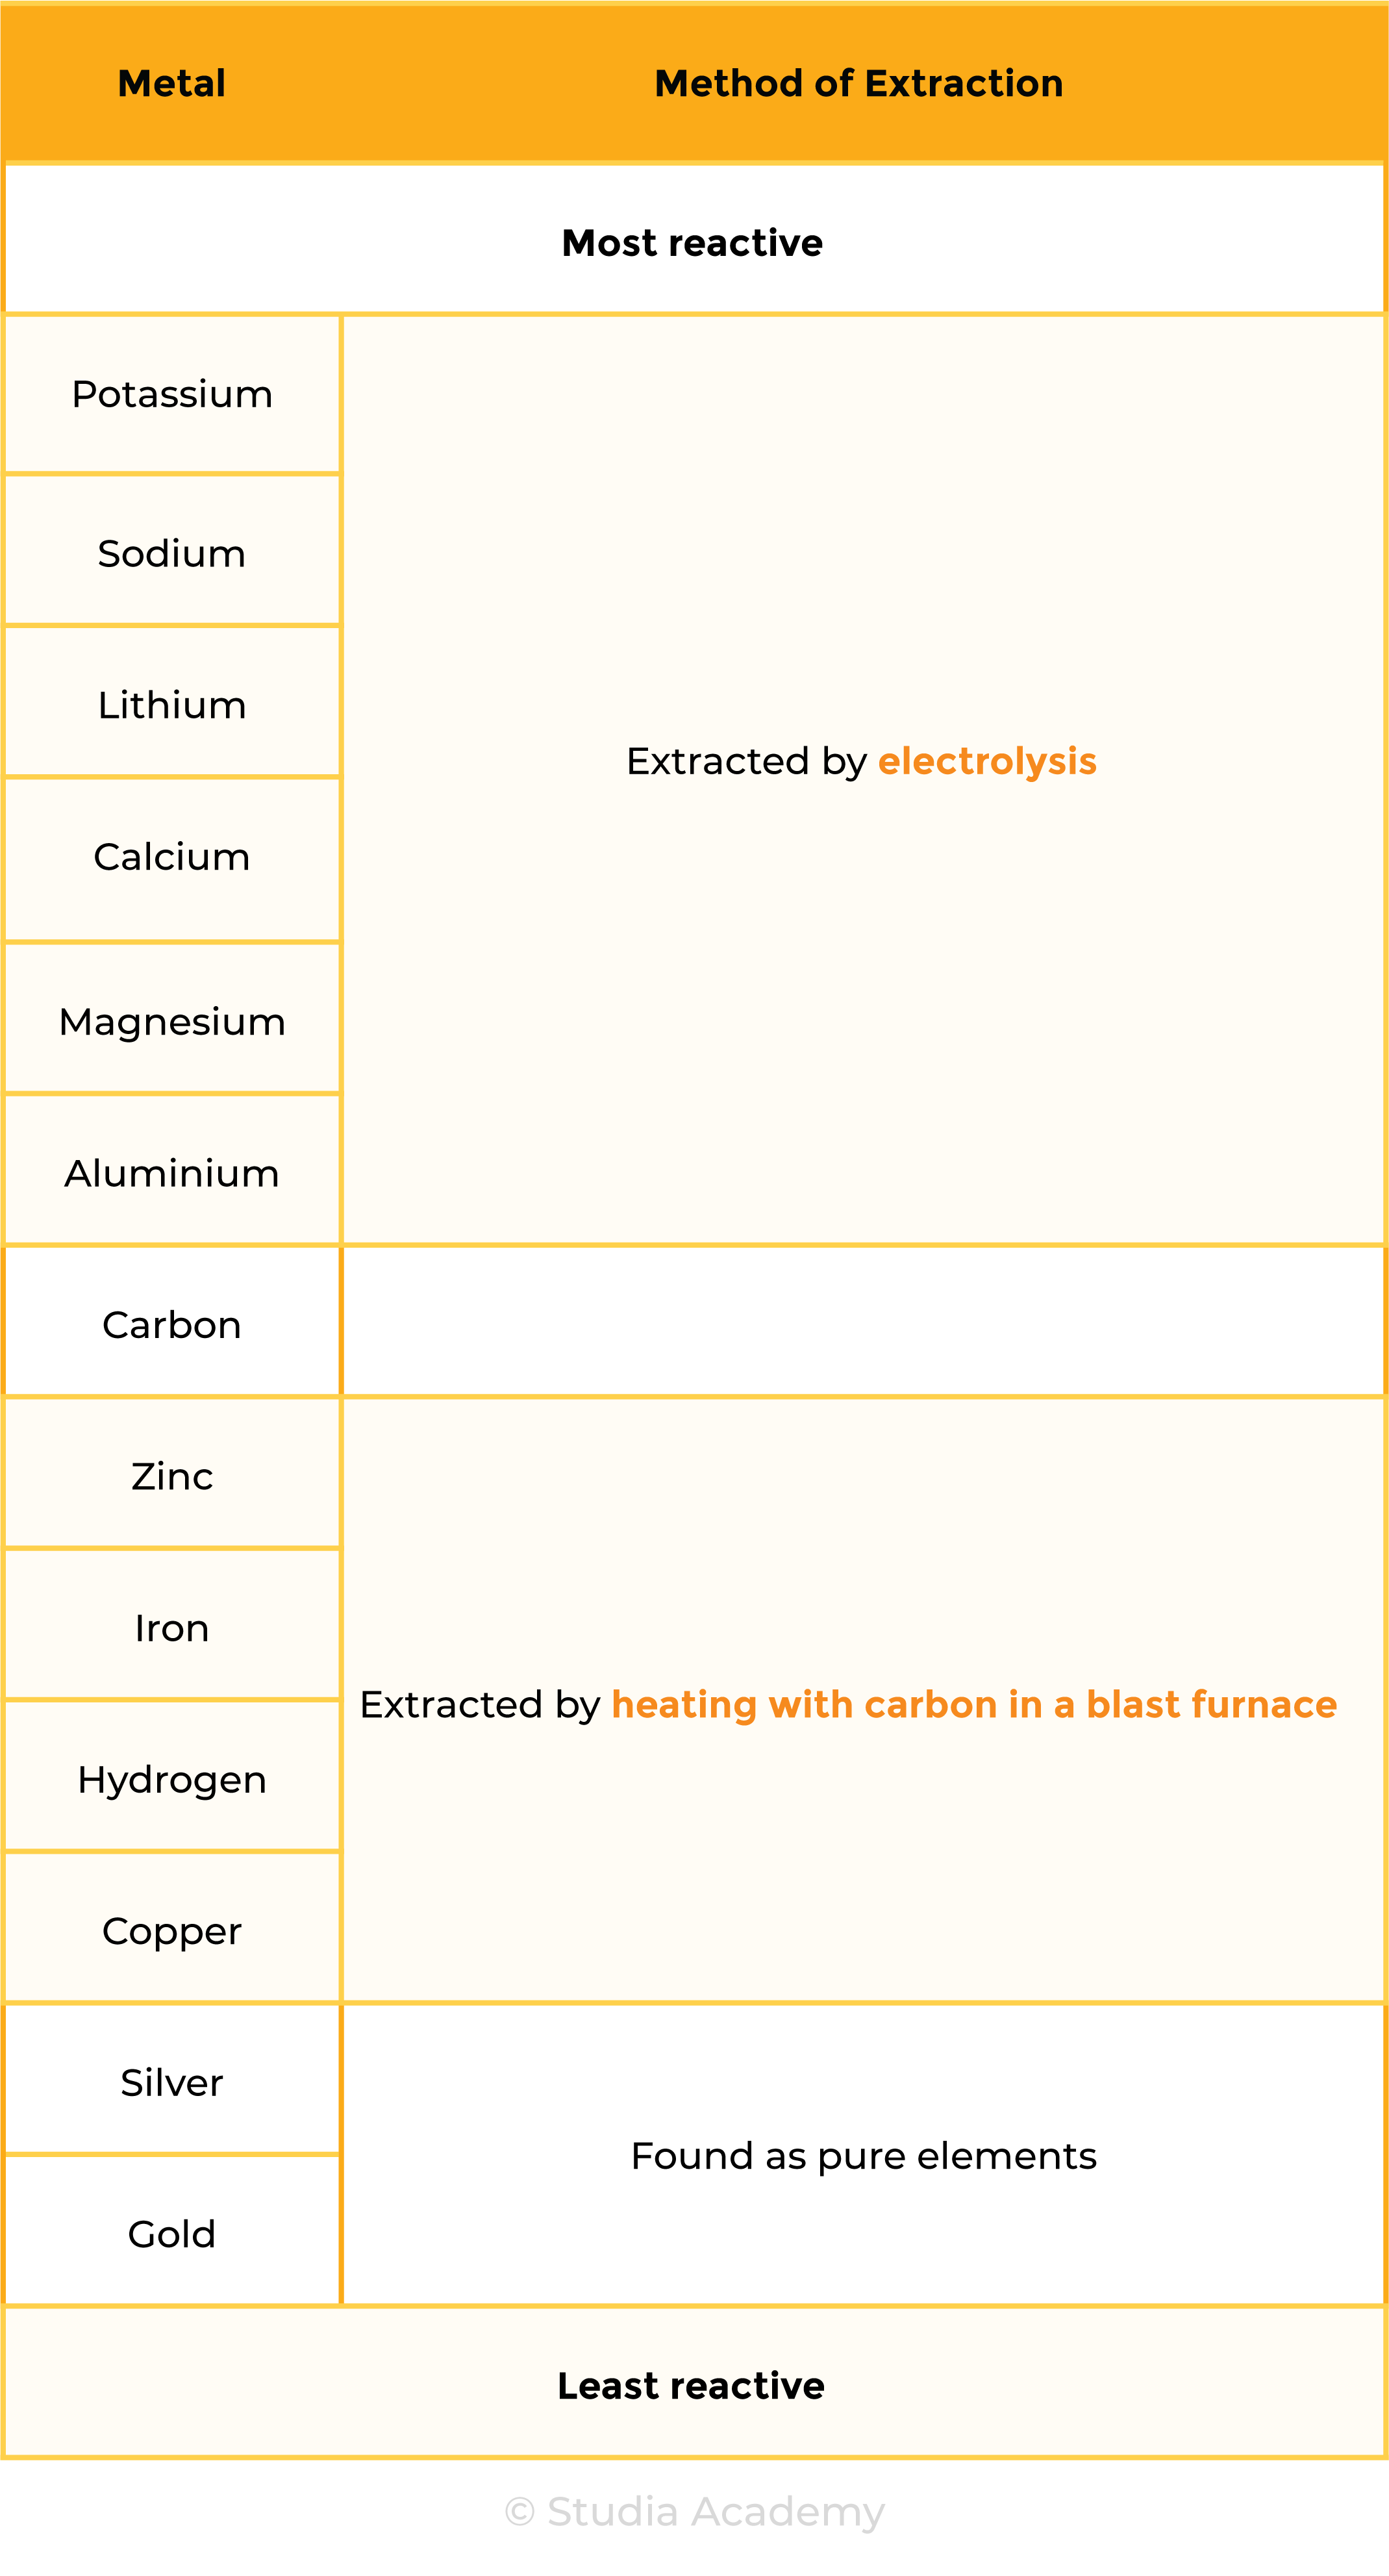 edexcel_igcse_chemistry_topic 14 tables_extraction and uses of metals_001_extraction method of metals according to reactivity series